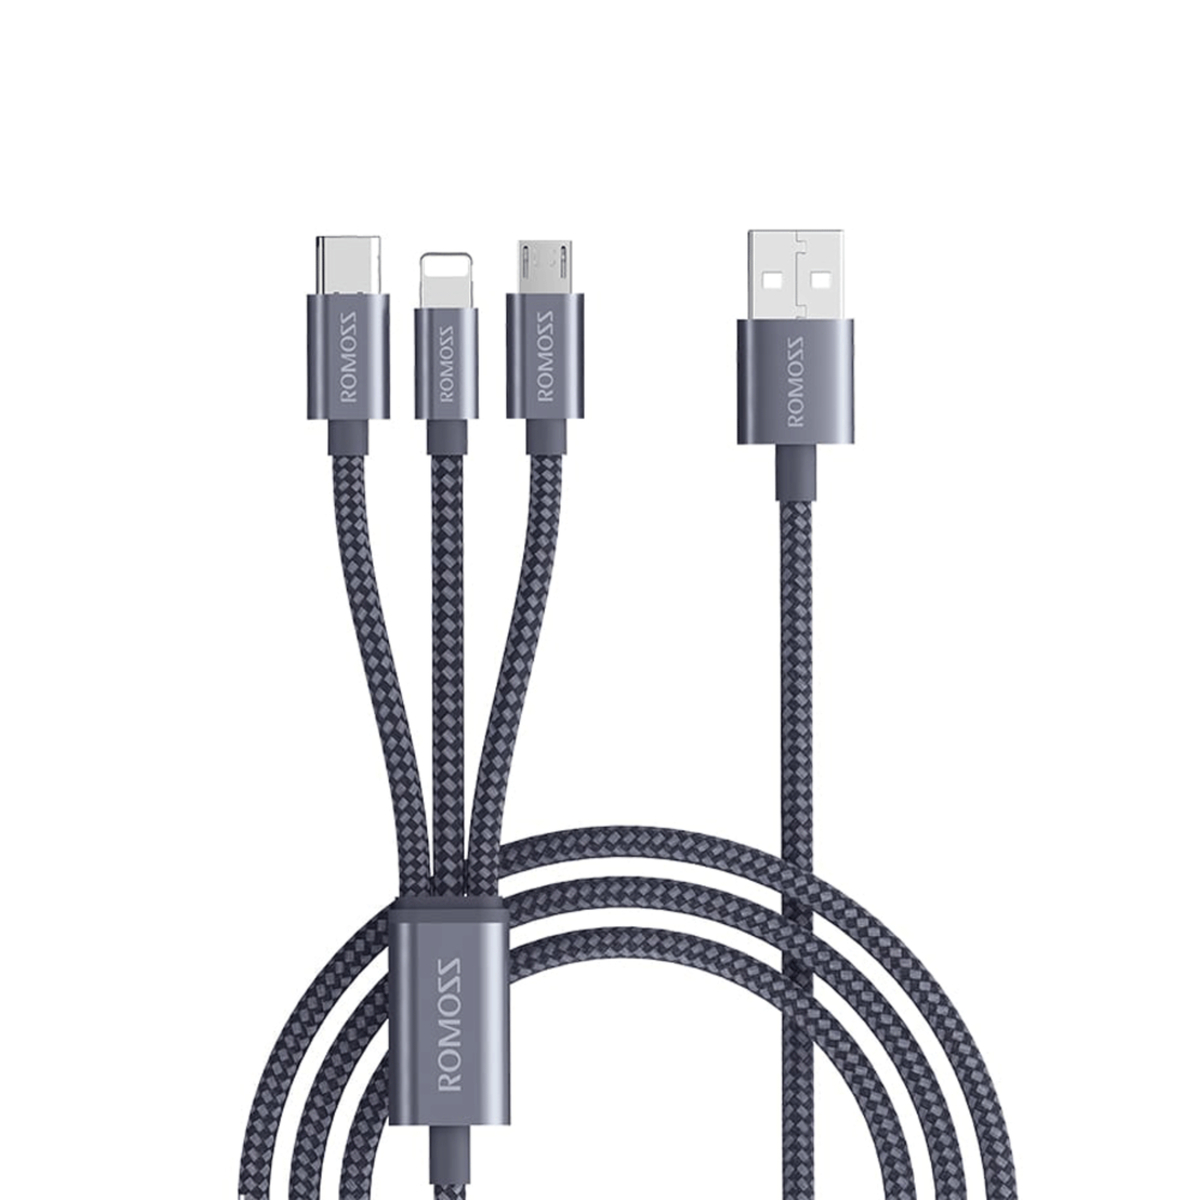 Romoss 3 in 1 Micro USB Type C Cable, Space Gray